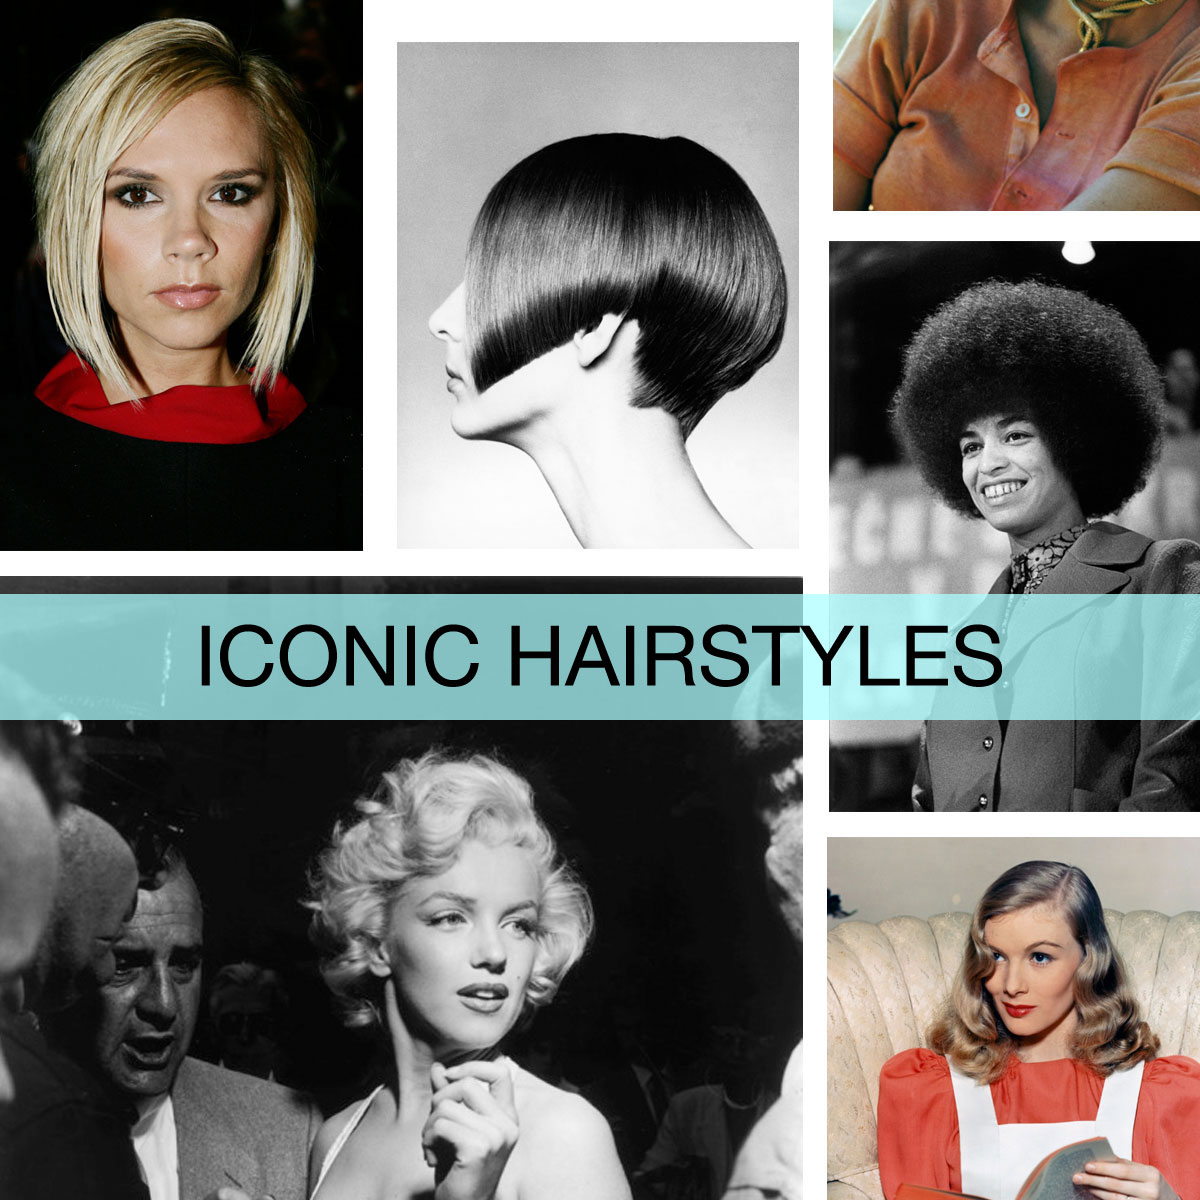   The 50 Most Iconic Hairstyles of All Time &nbsp;for&nbsp; New York Magazine 's The Cut  October 2013 